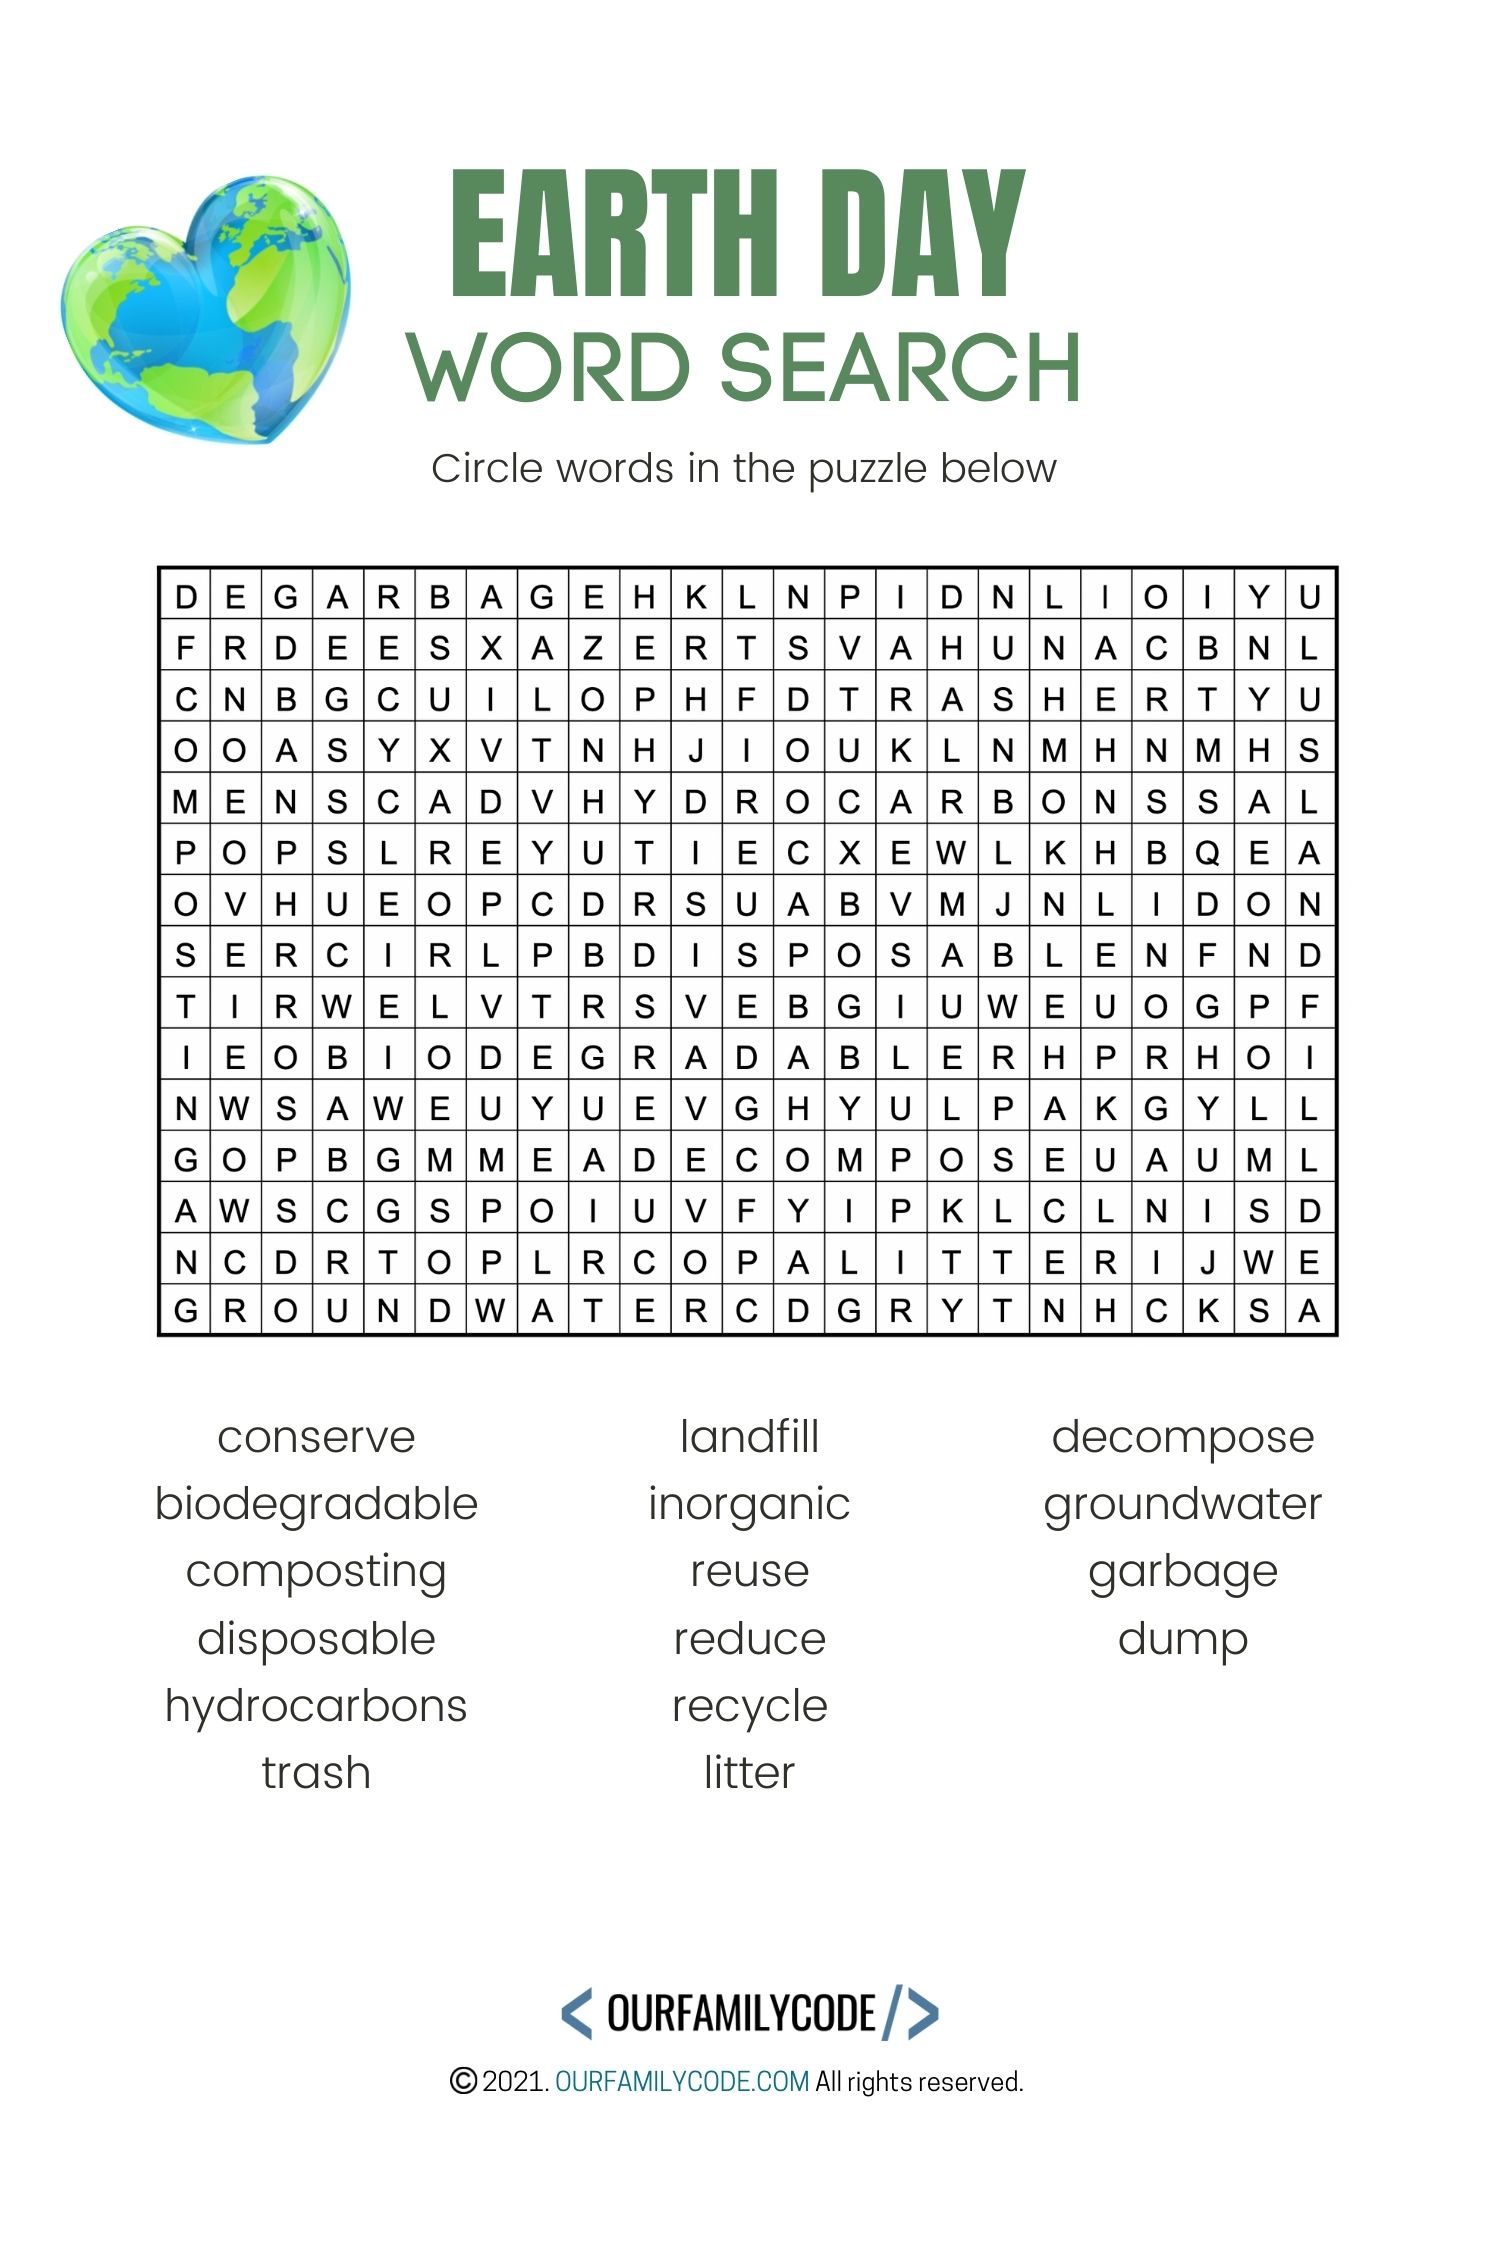 A picture of an Earth Day word search puzzle.